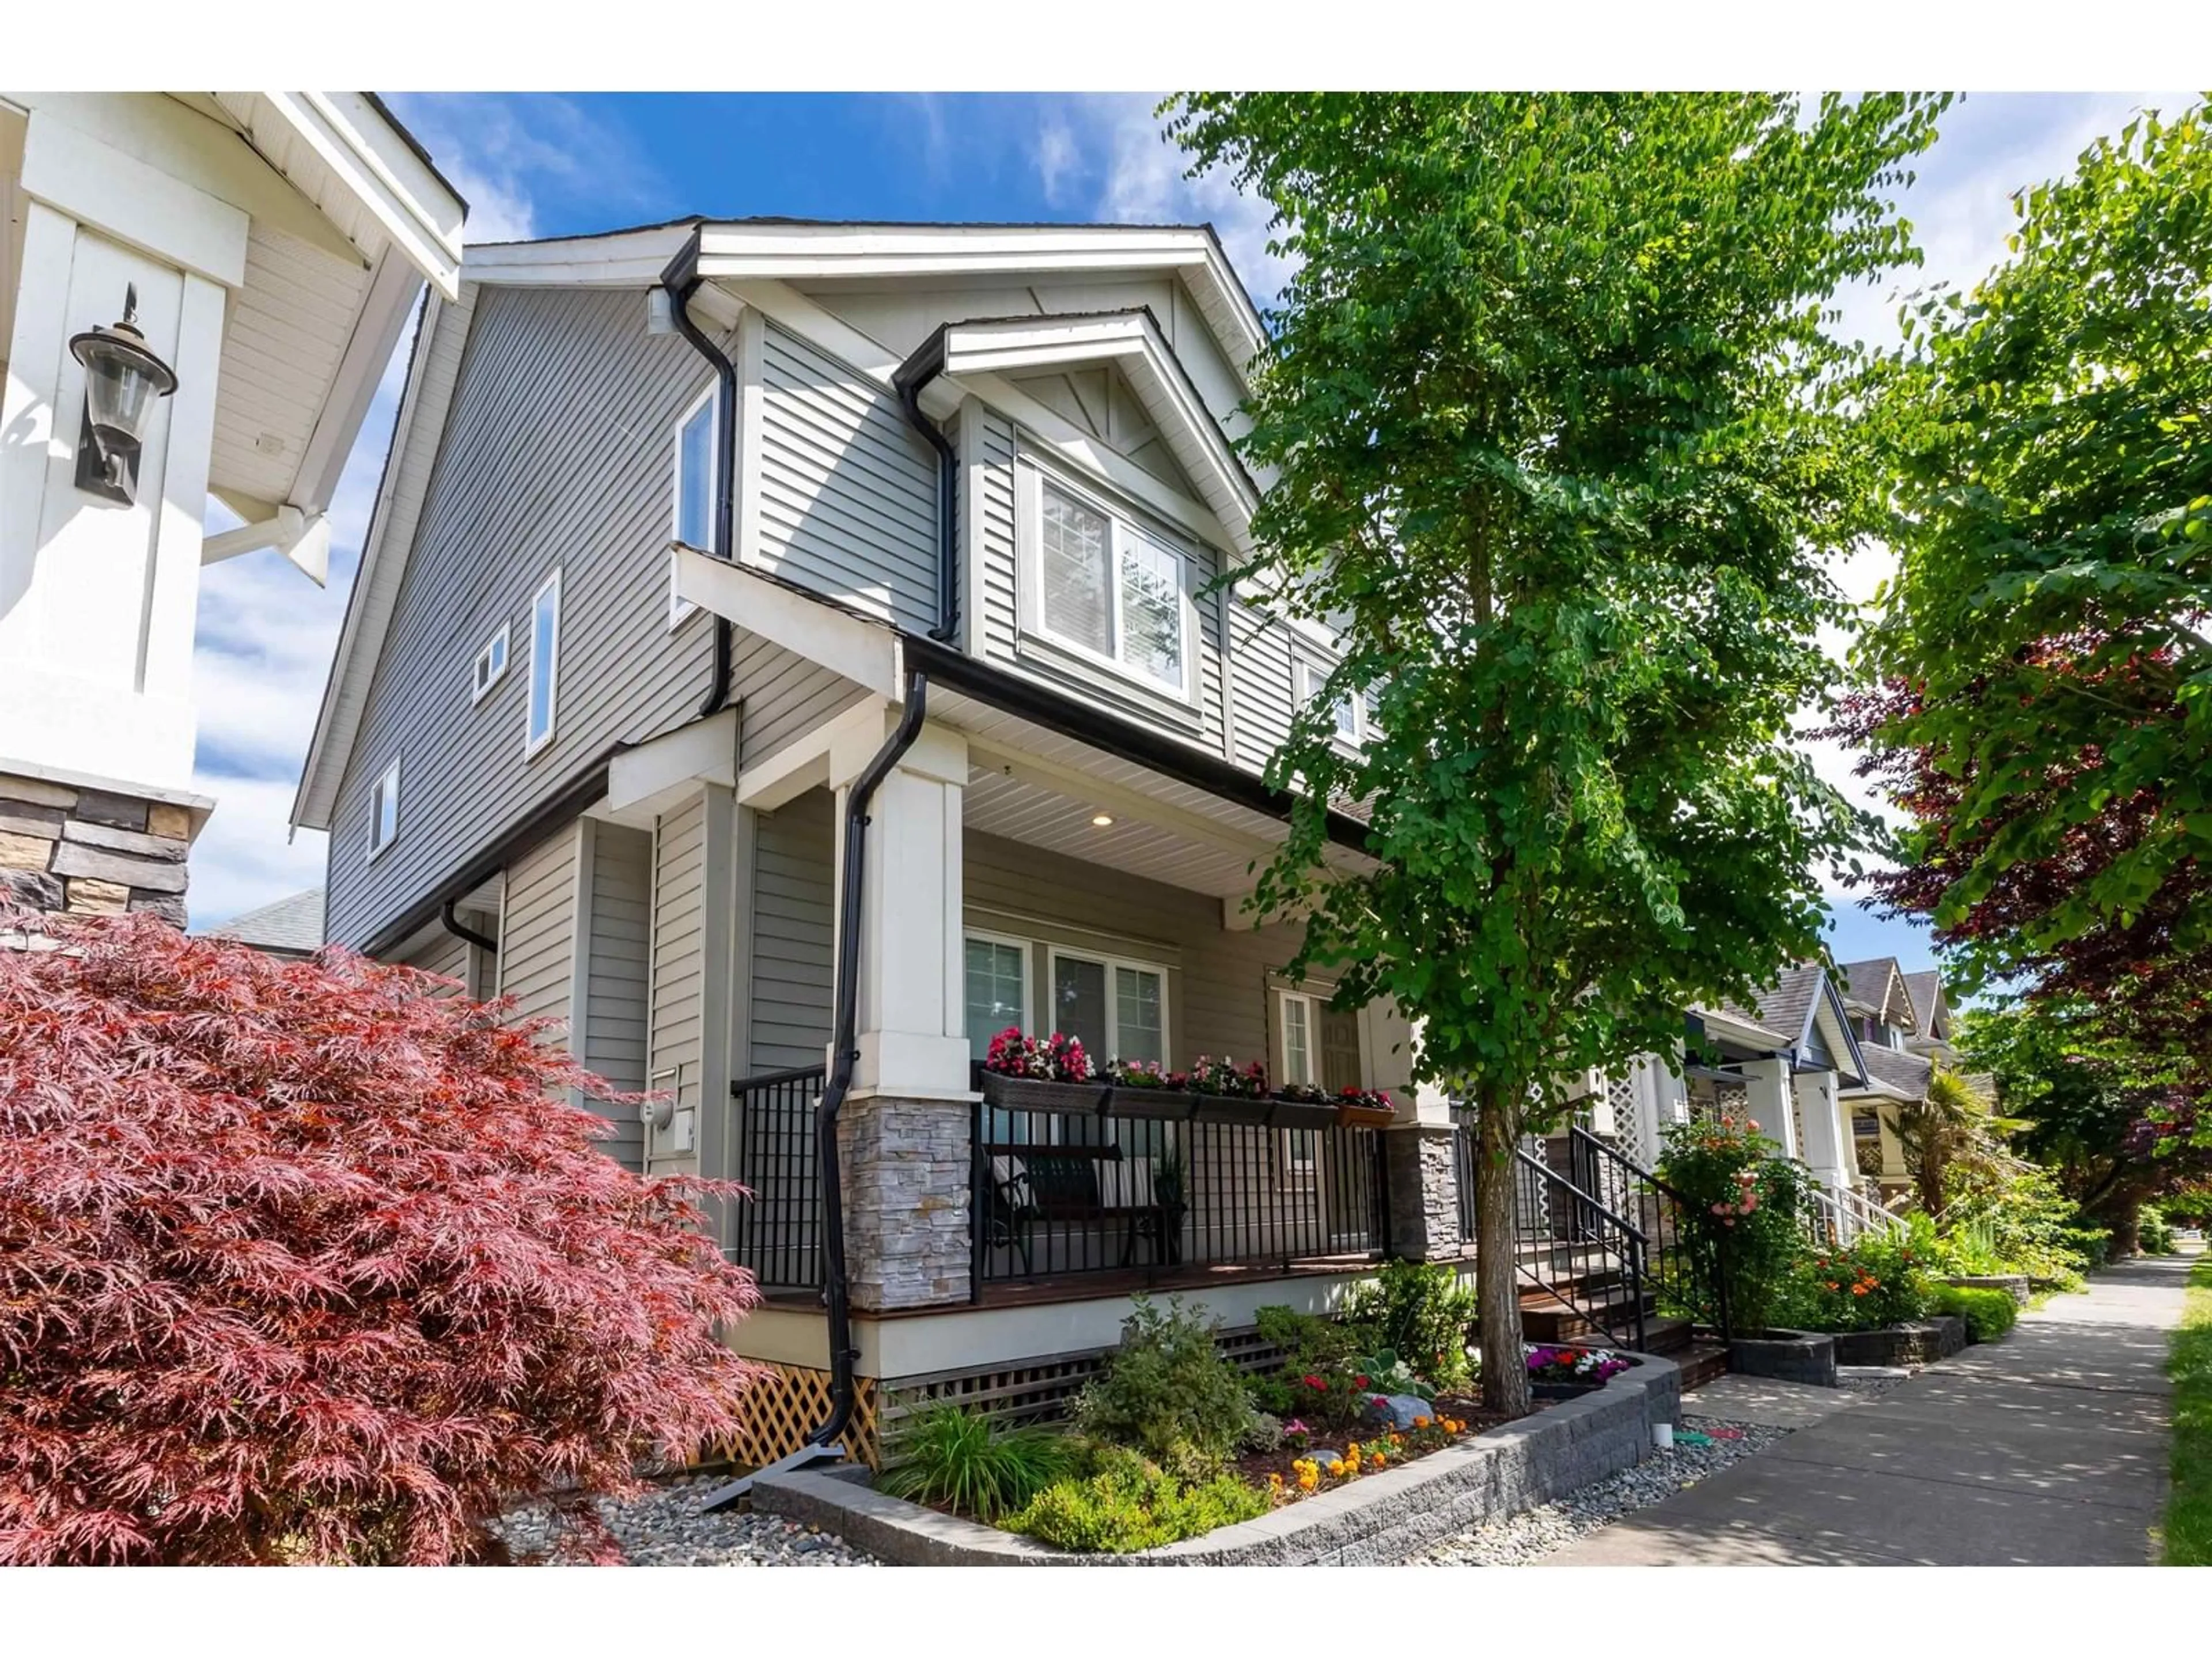 A pic from exterior of the house or condo for 6690 193A STREET, Surrey British Columbia V4N0C1